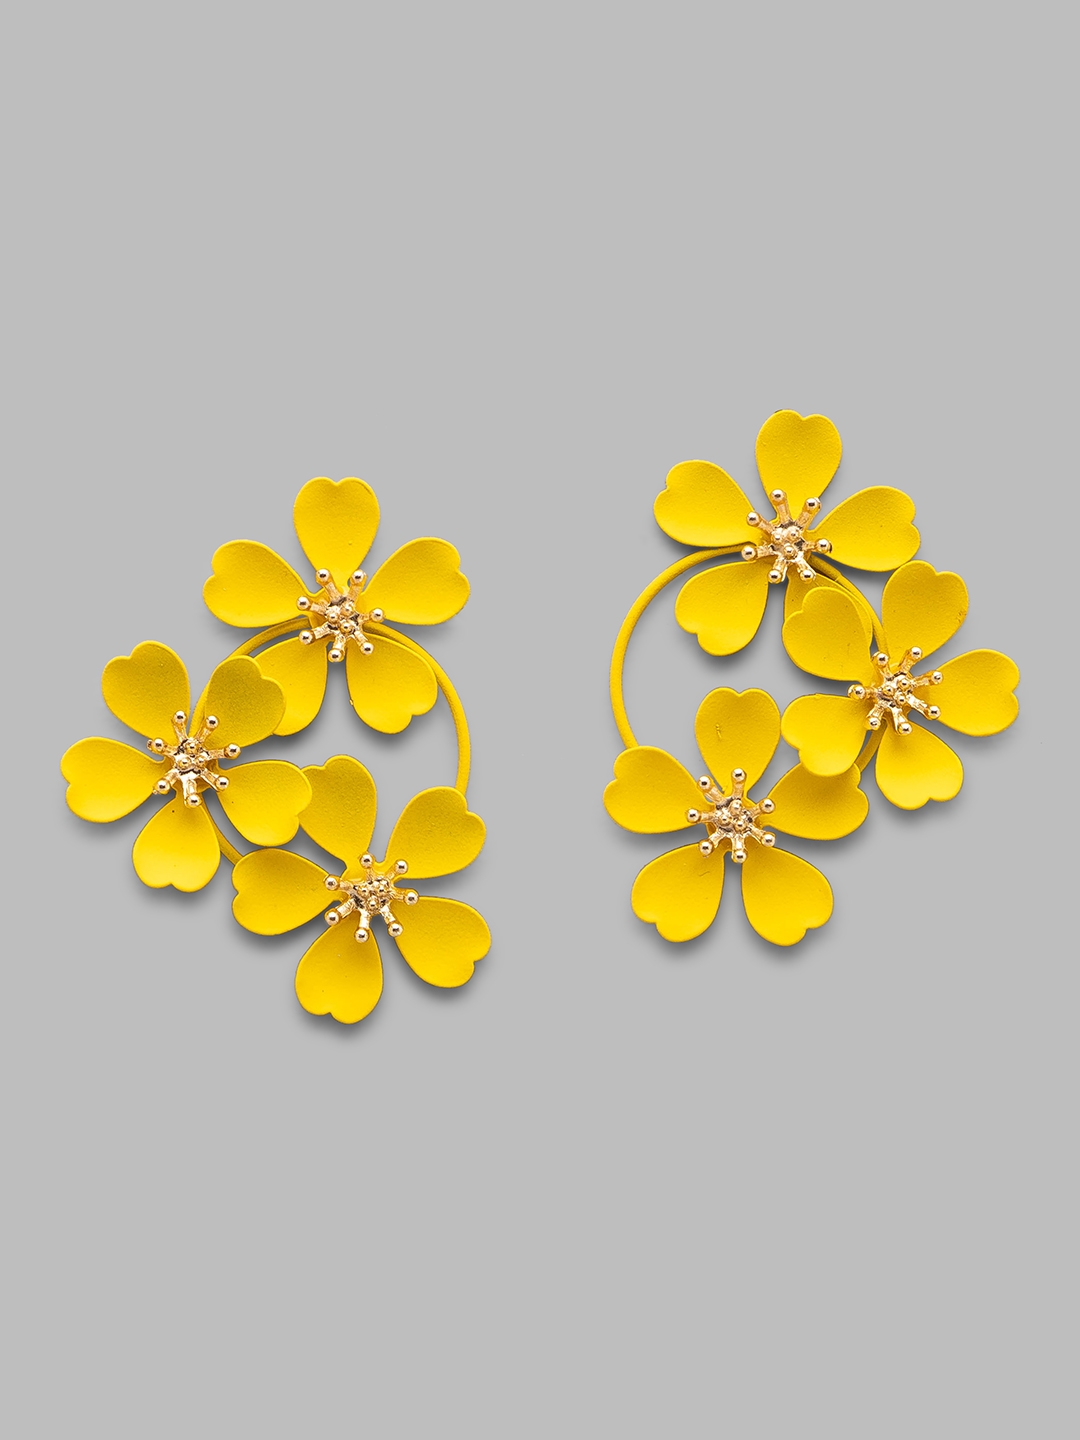 Buy Yellow Flower Earring Online In India - Etsy India